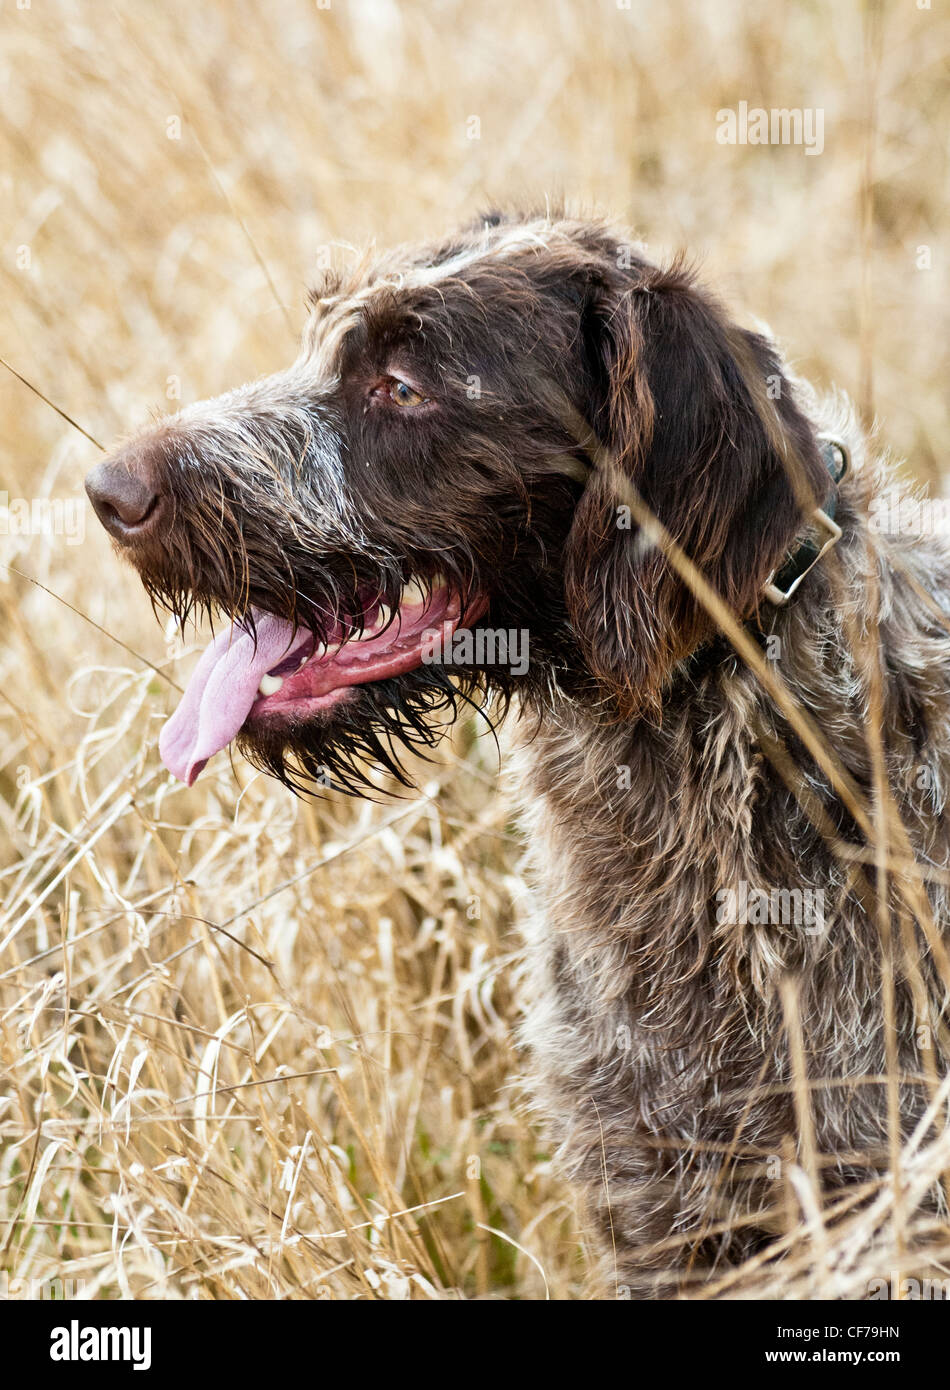 German wired haired pointer Stock Photo